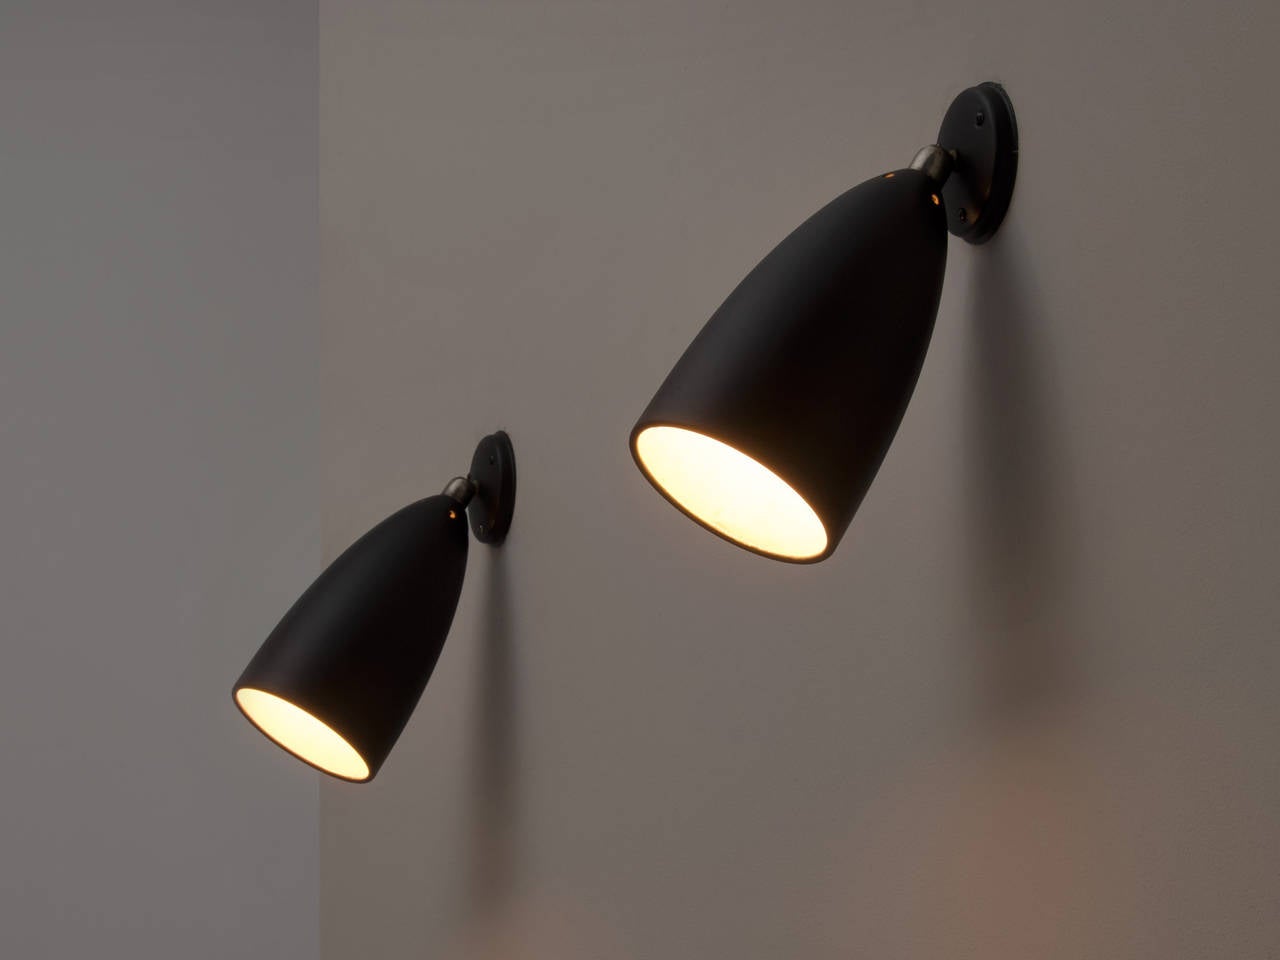 Wonderful set of two adjustable wall lights with black matte coated shade and base. The adjustable part is made of brass.

Can be used as down lighter and uplighter and the lights are fully adjustable. 
Very versatile and functional to use